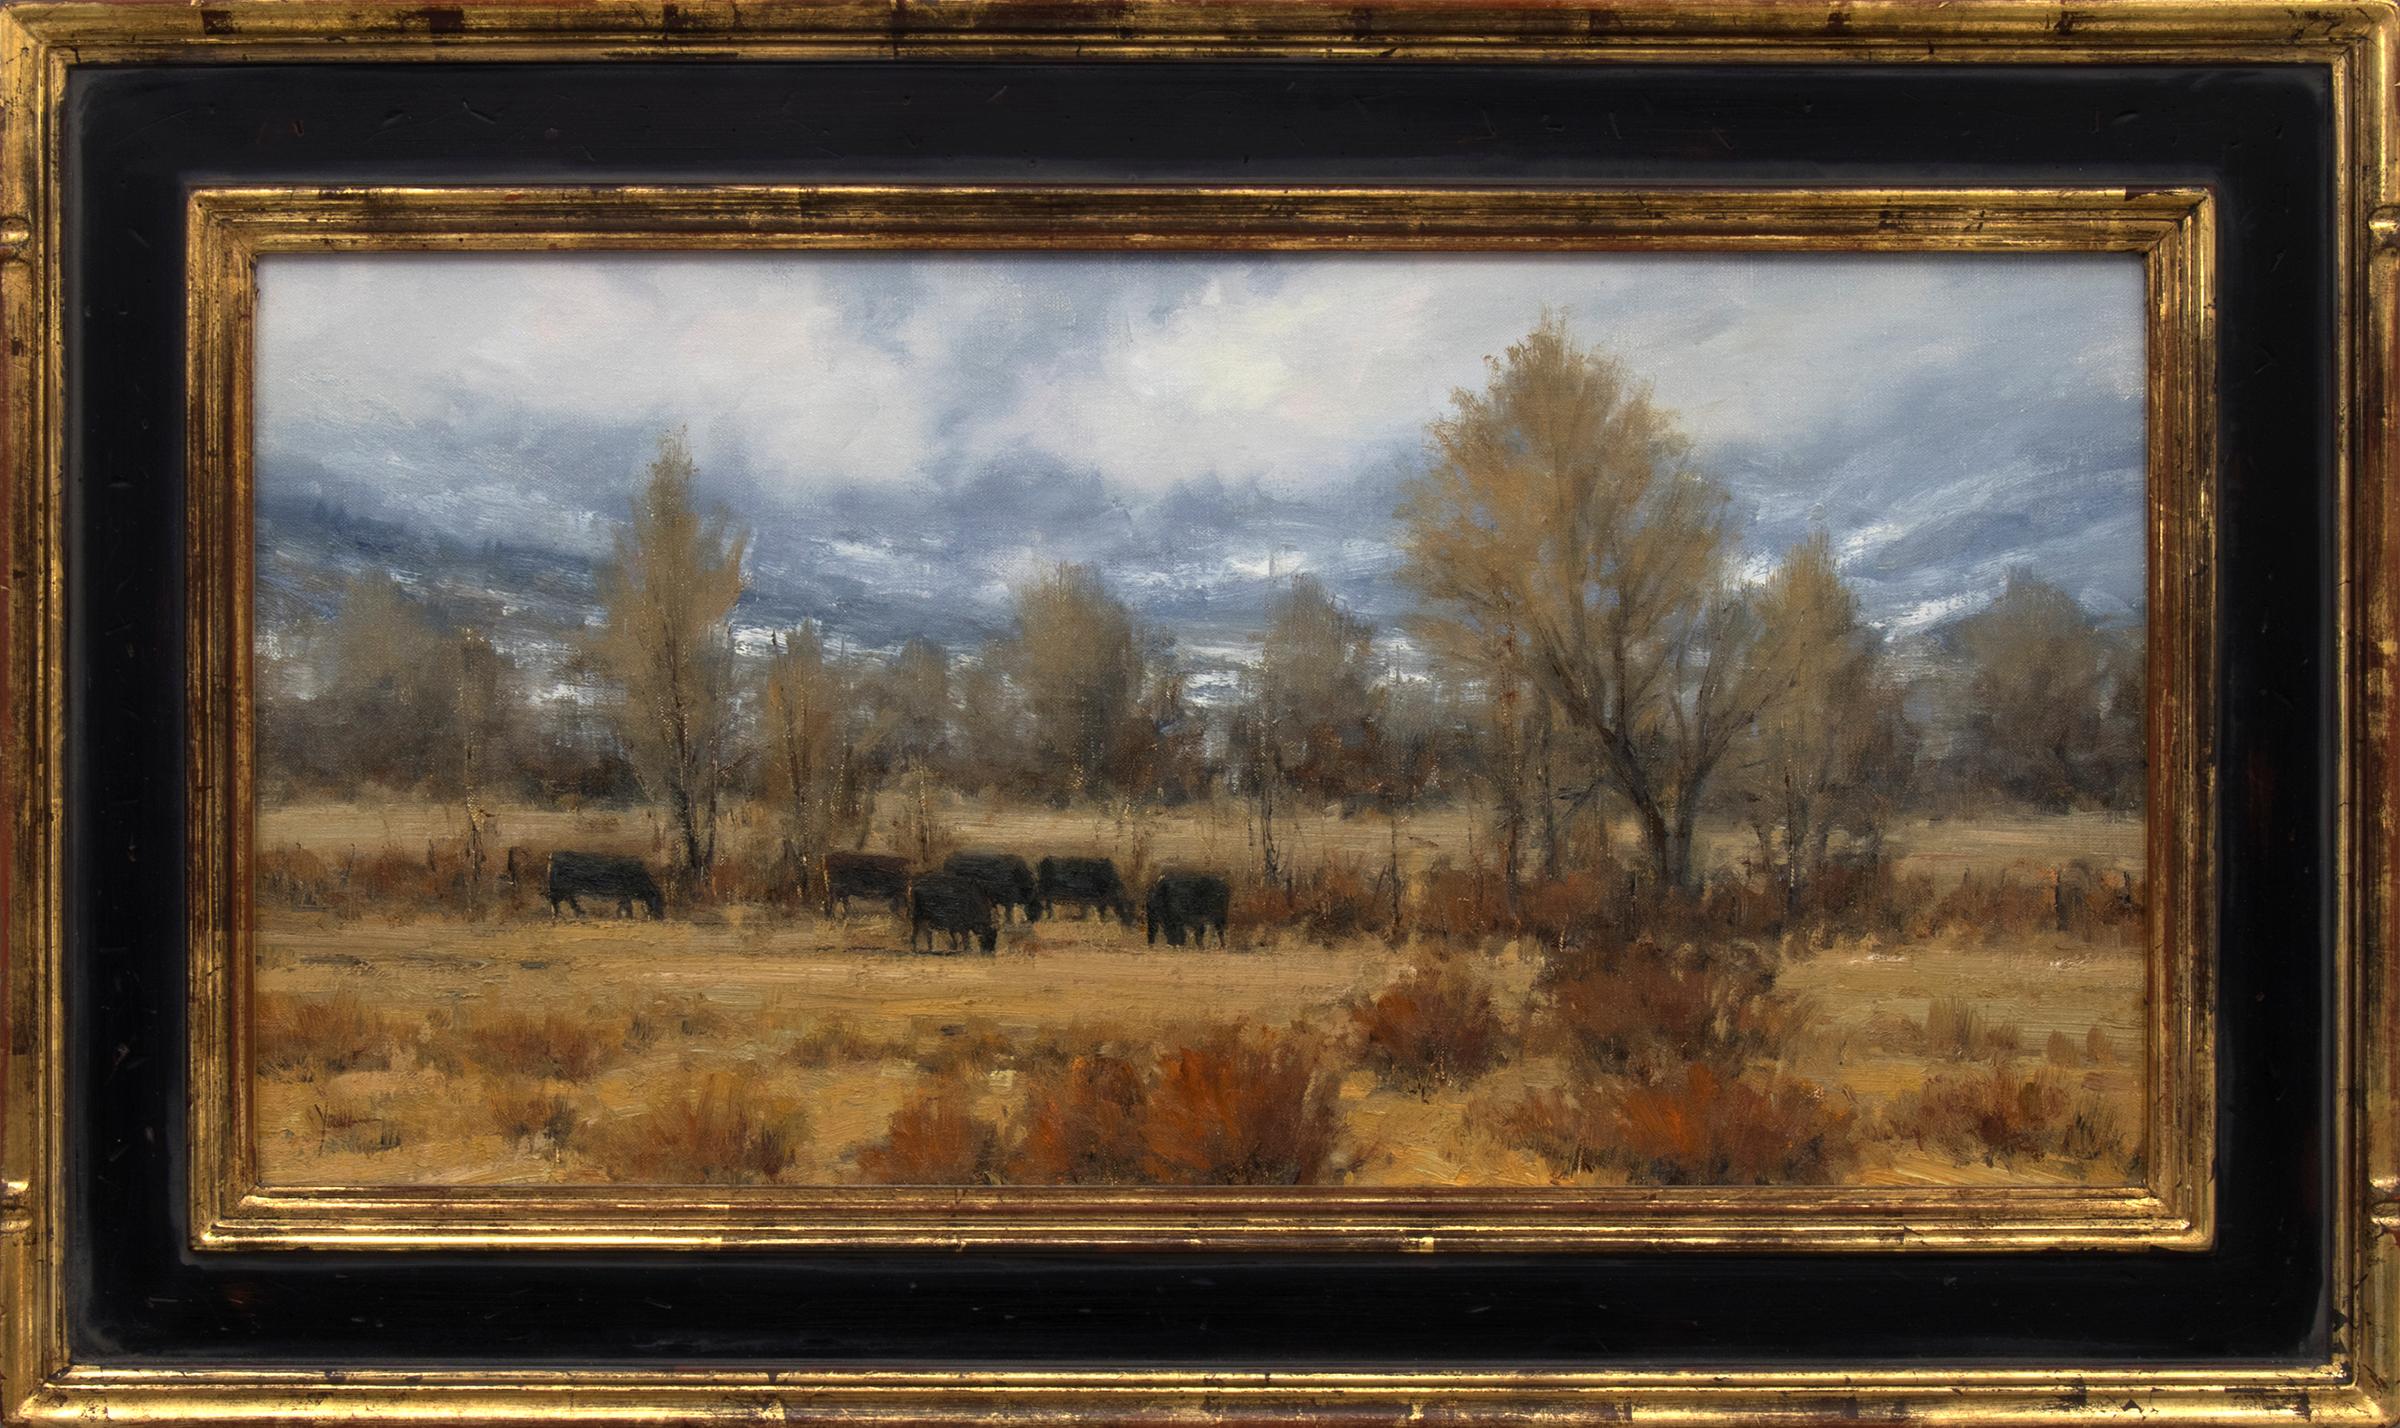 Dan Young Animal Painting - November Weather, Fall Autumn Landscape Oil Painting, Blue, Greens and Yellows